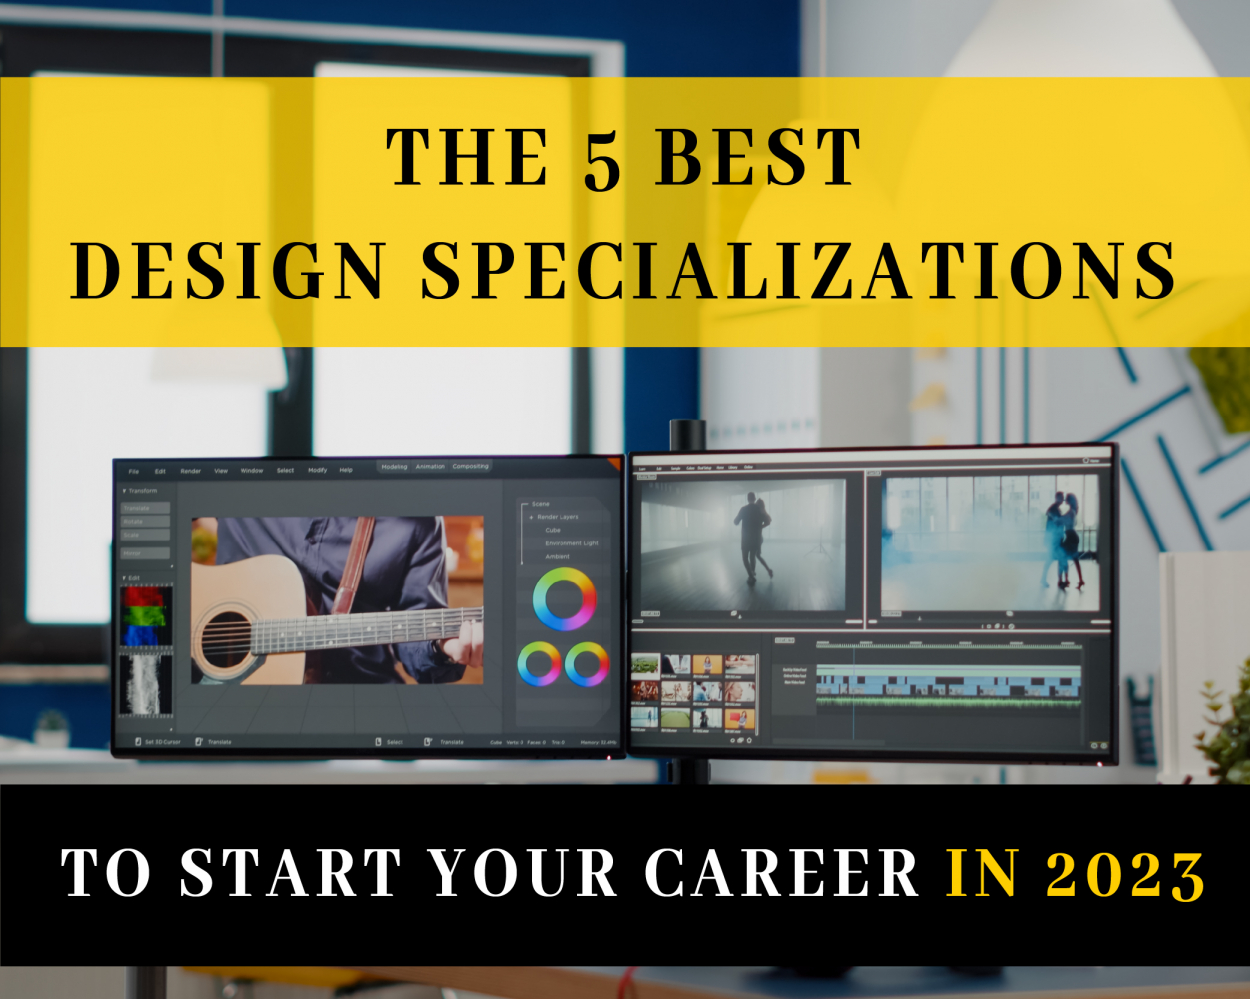 The 5 Best Design Specializations to Start Your Career In 2023